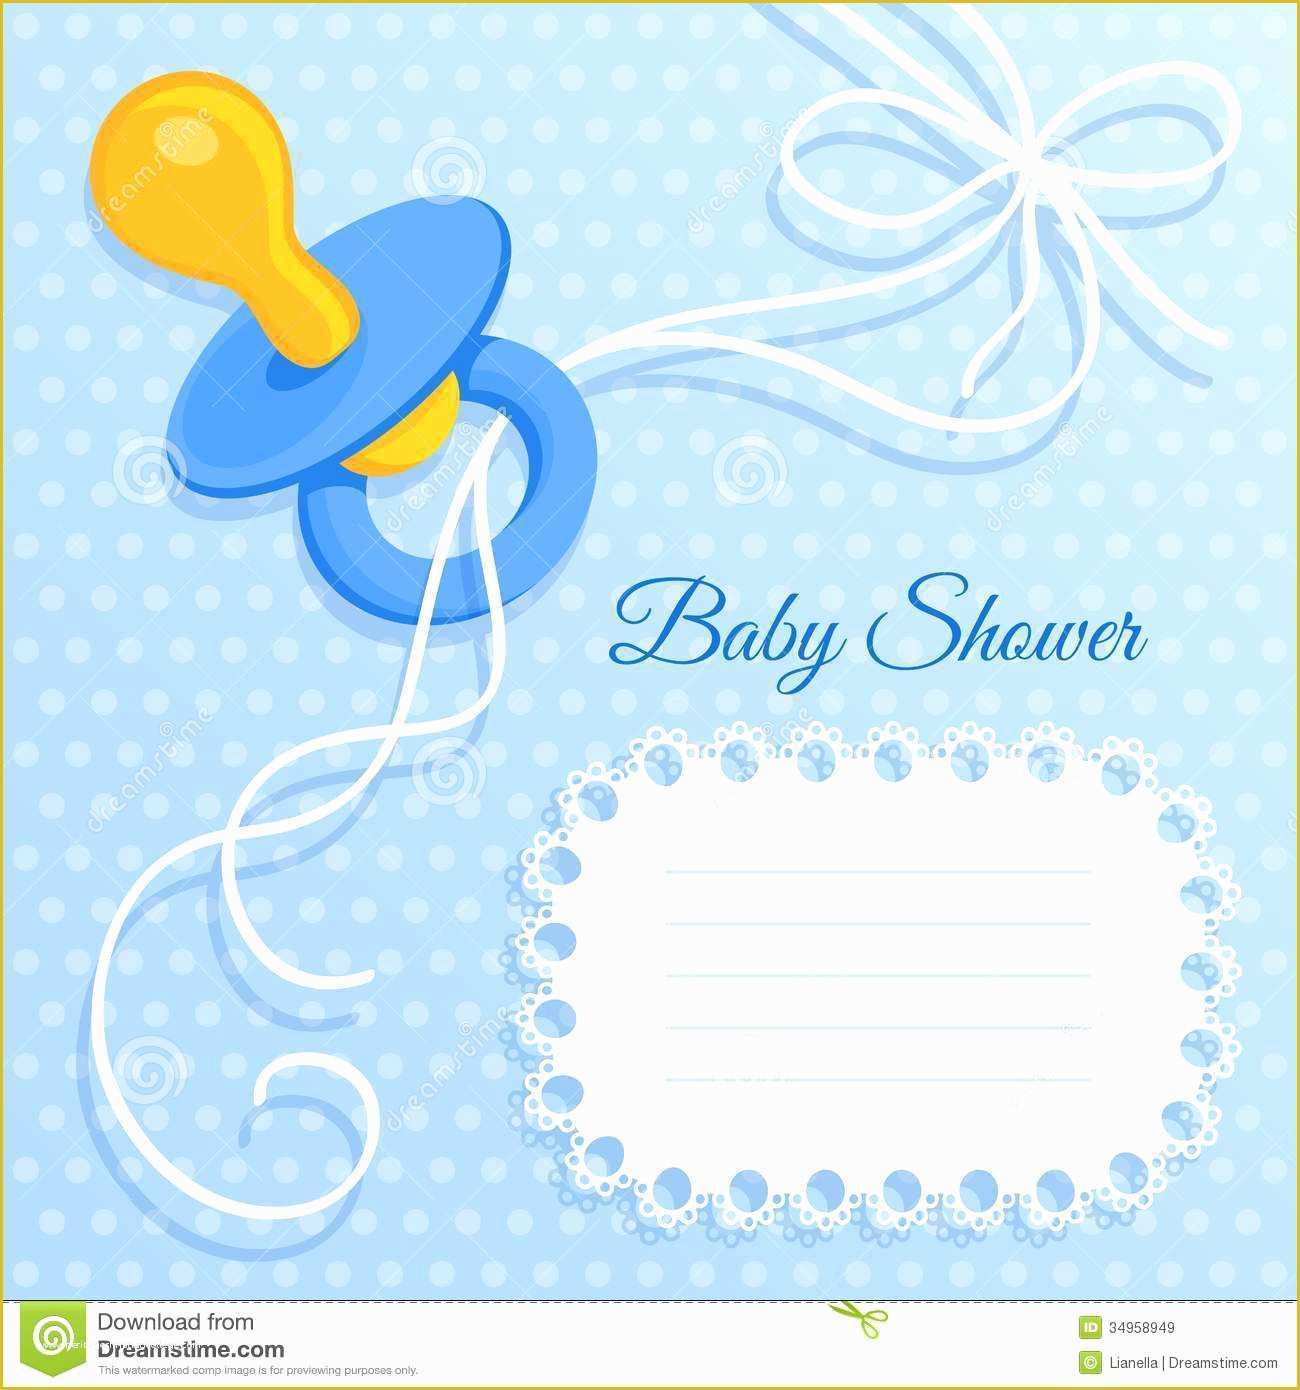 Baby Shower Invitation Card Template Free Download Of Baby Shower Invitations Cards Designs Baby Shower